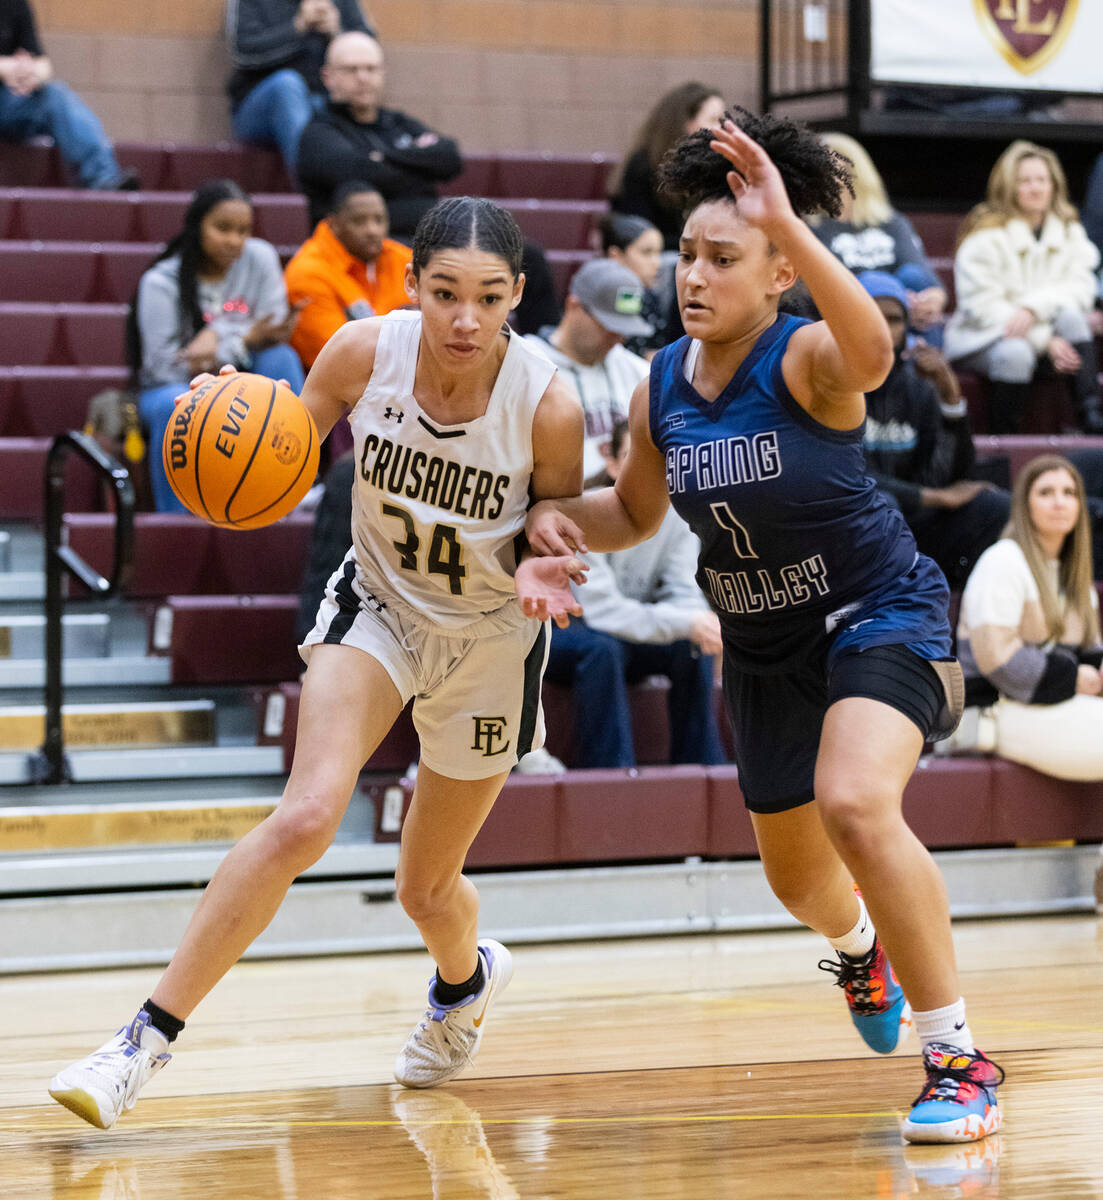 Faith Lutheran's Leah Mitchell (34) drives past Spring Valley's high Mia Ervin (1) during the f ...